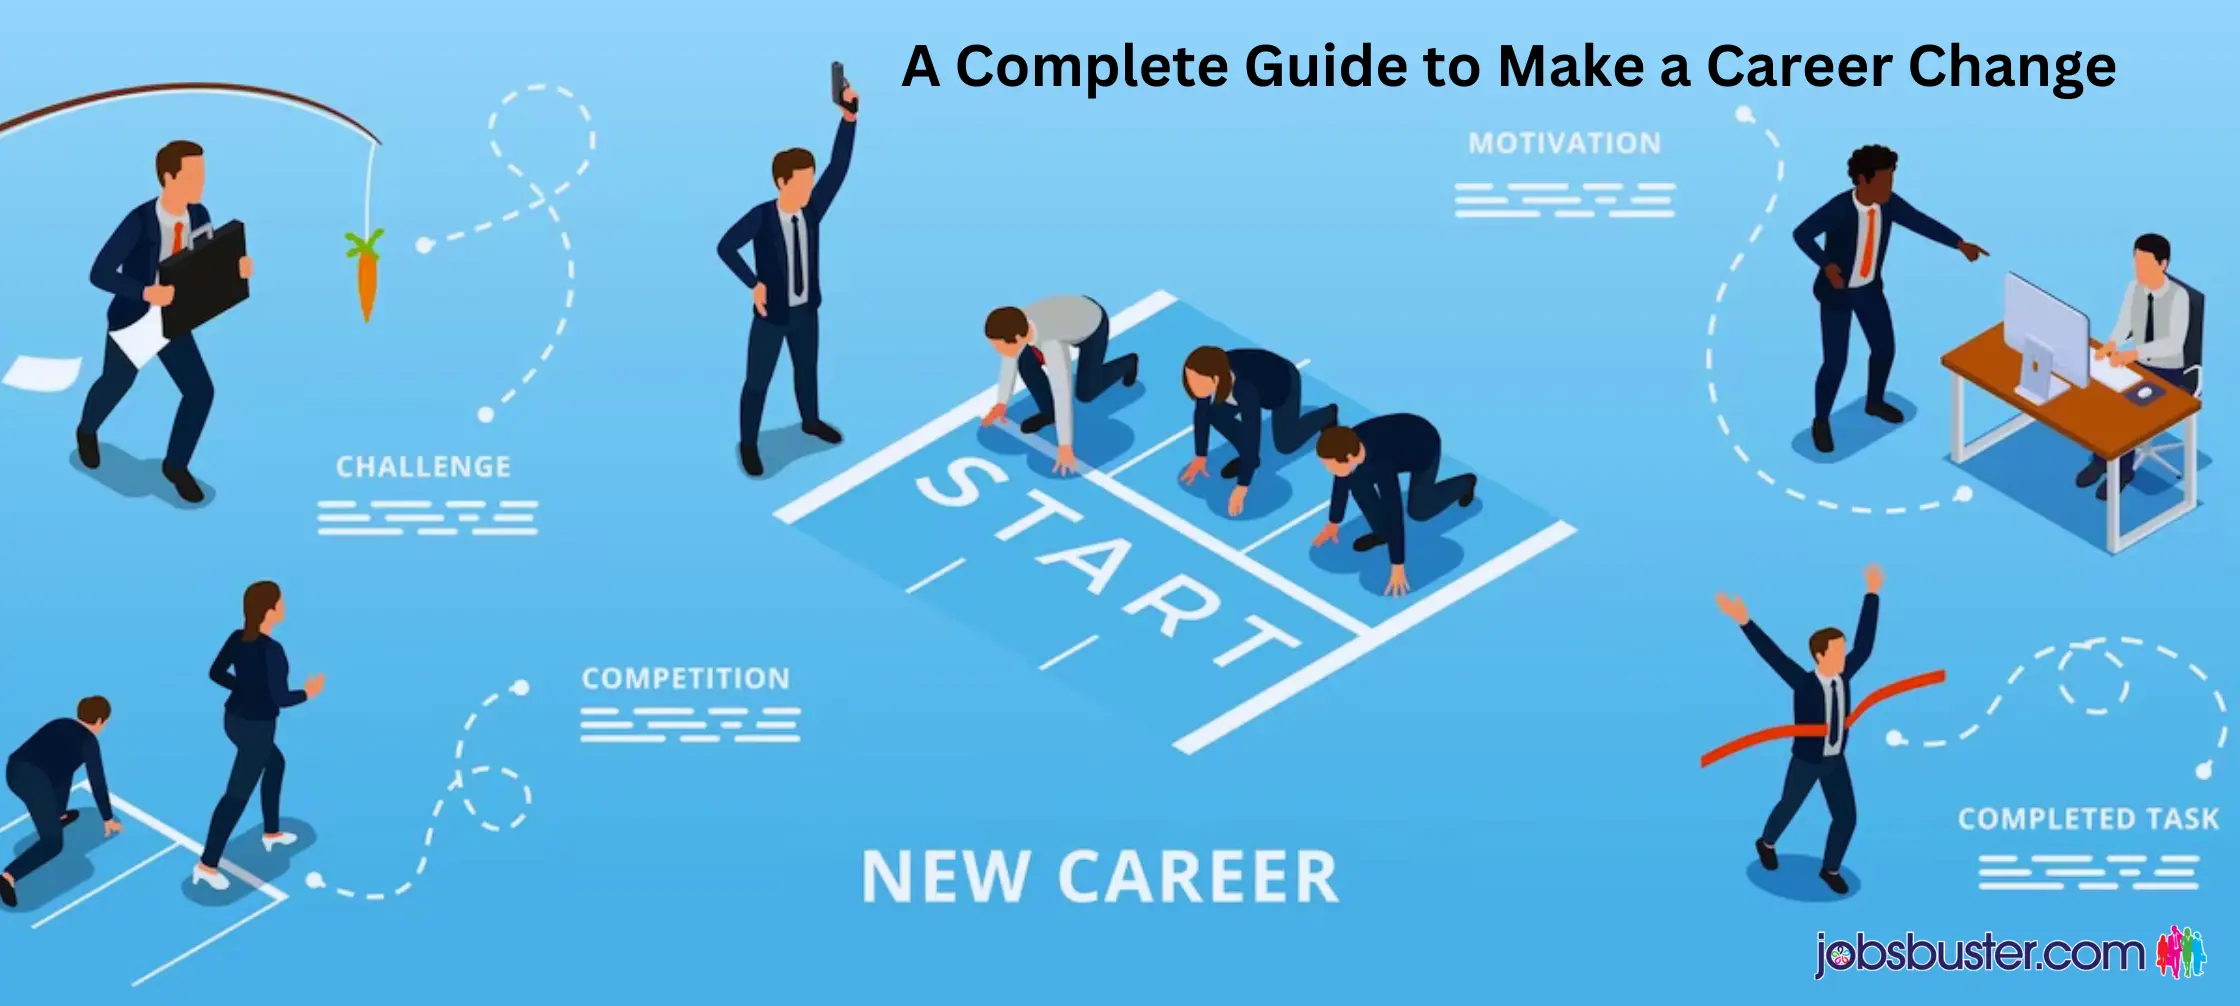 A Complete Guide to Make a Career Change